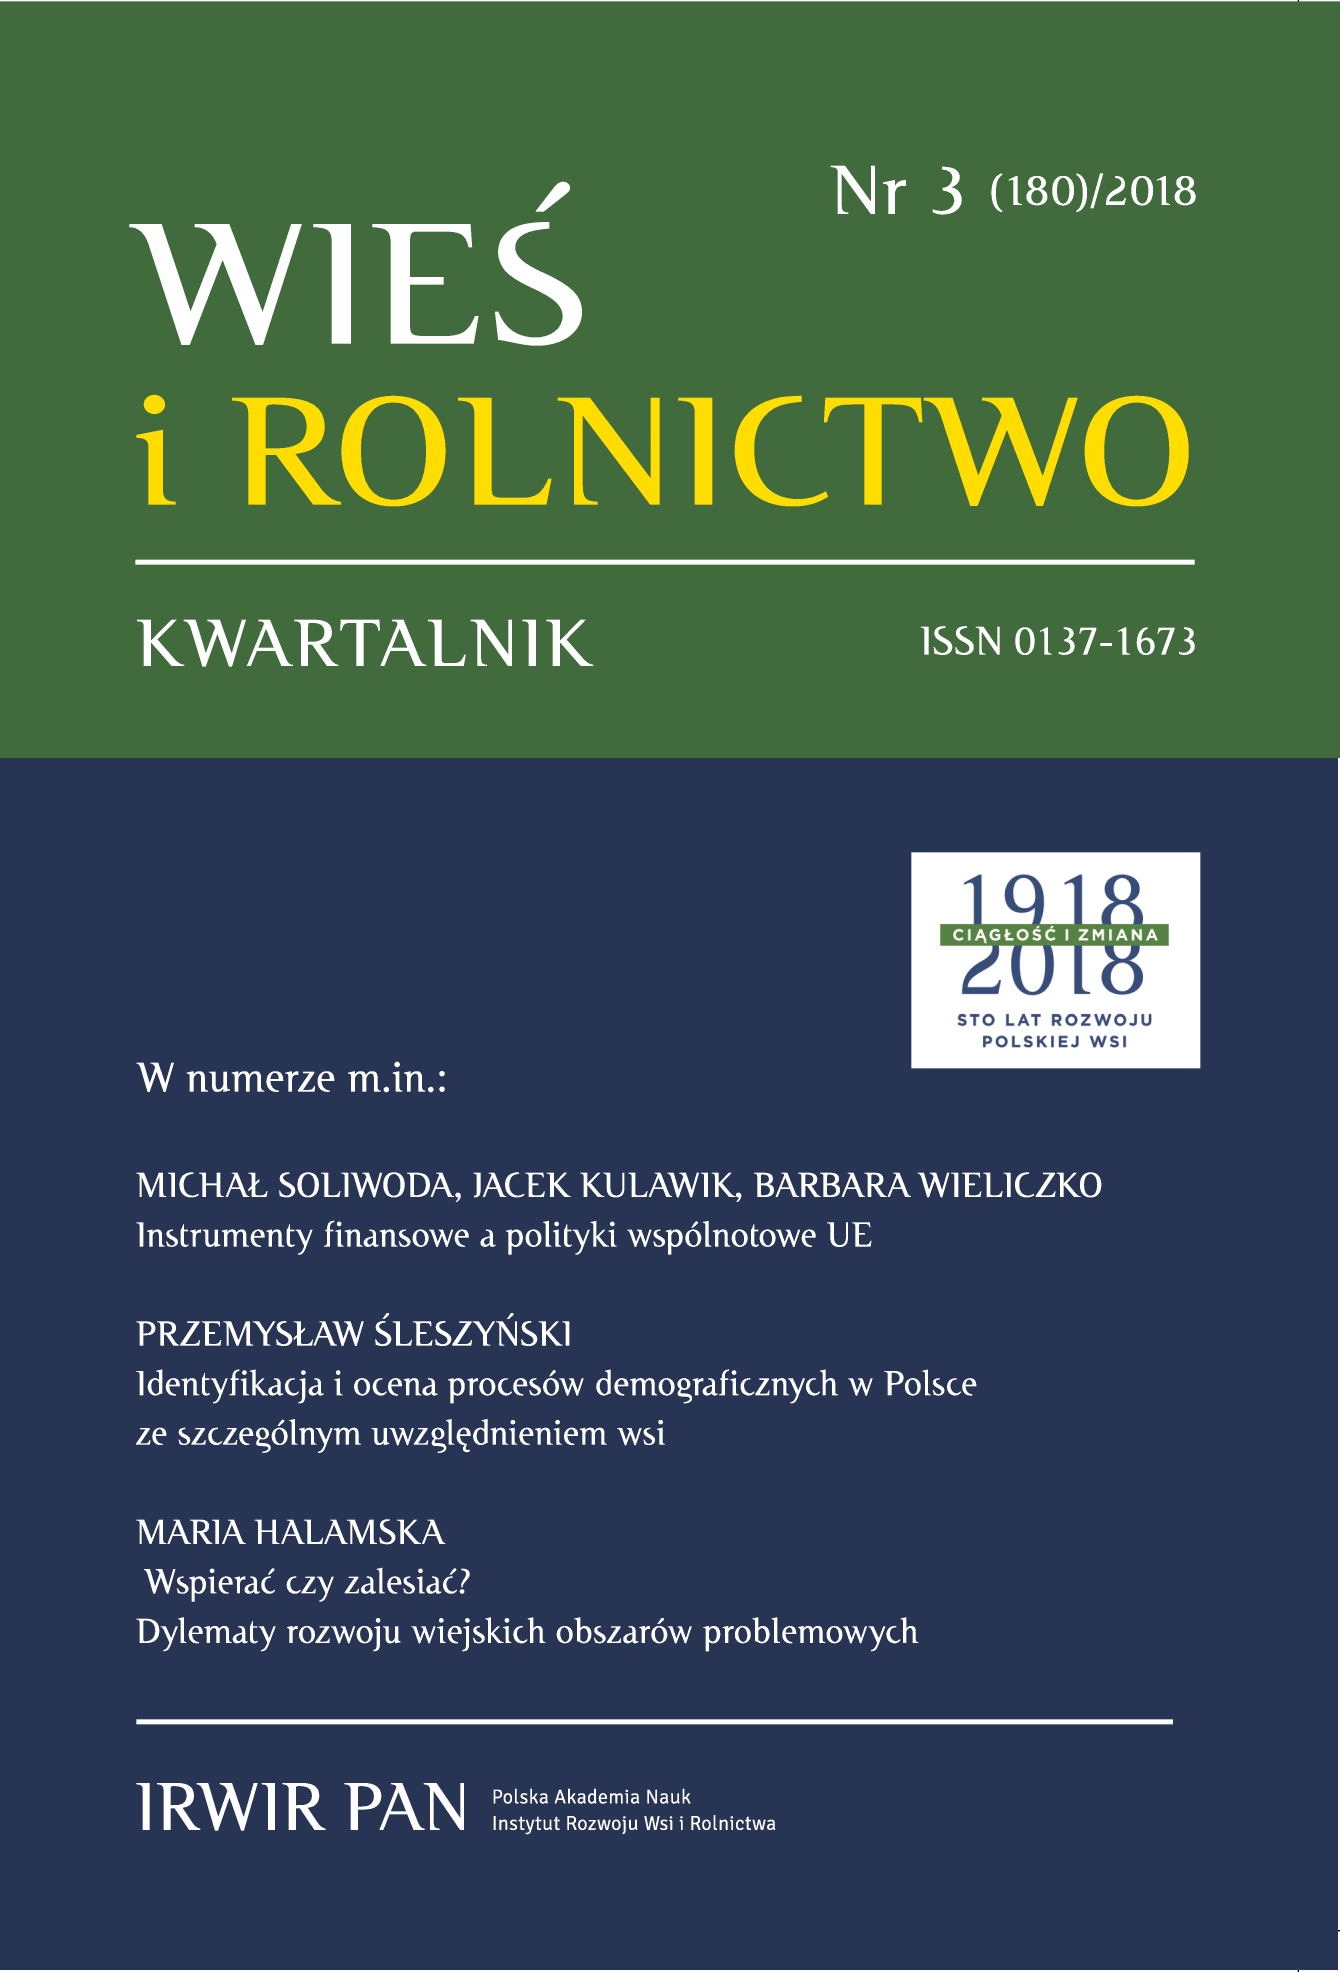 Identification and Evaluation of Demographic Processes
in Poland with Special Regard to the Rural Areas Cover Image